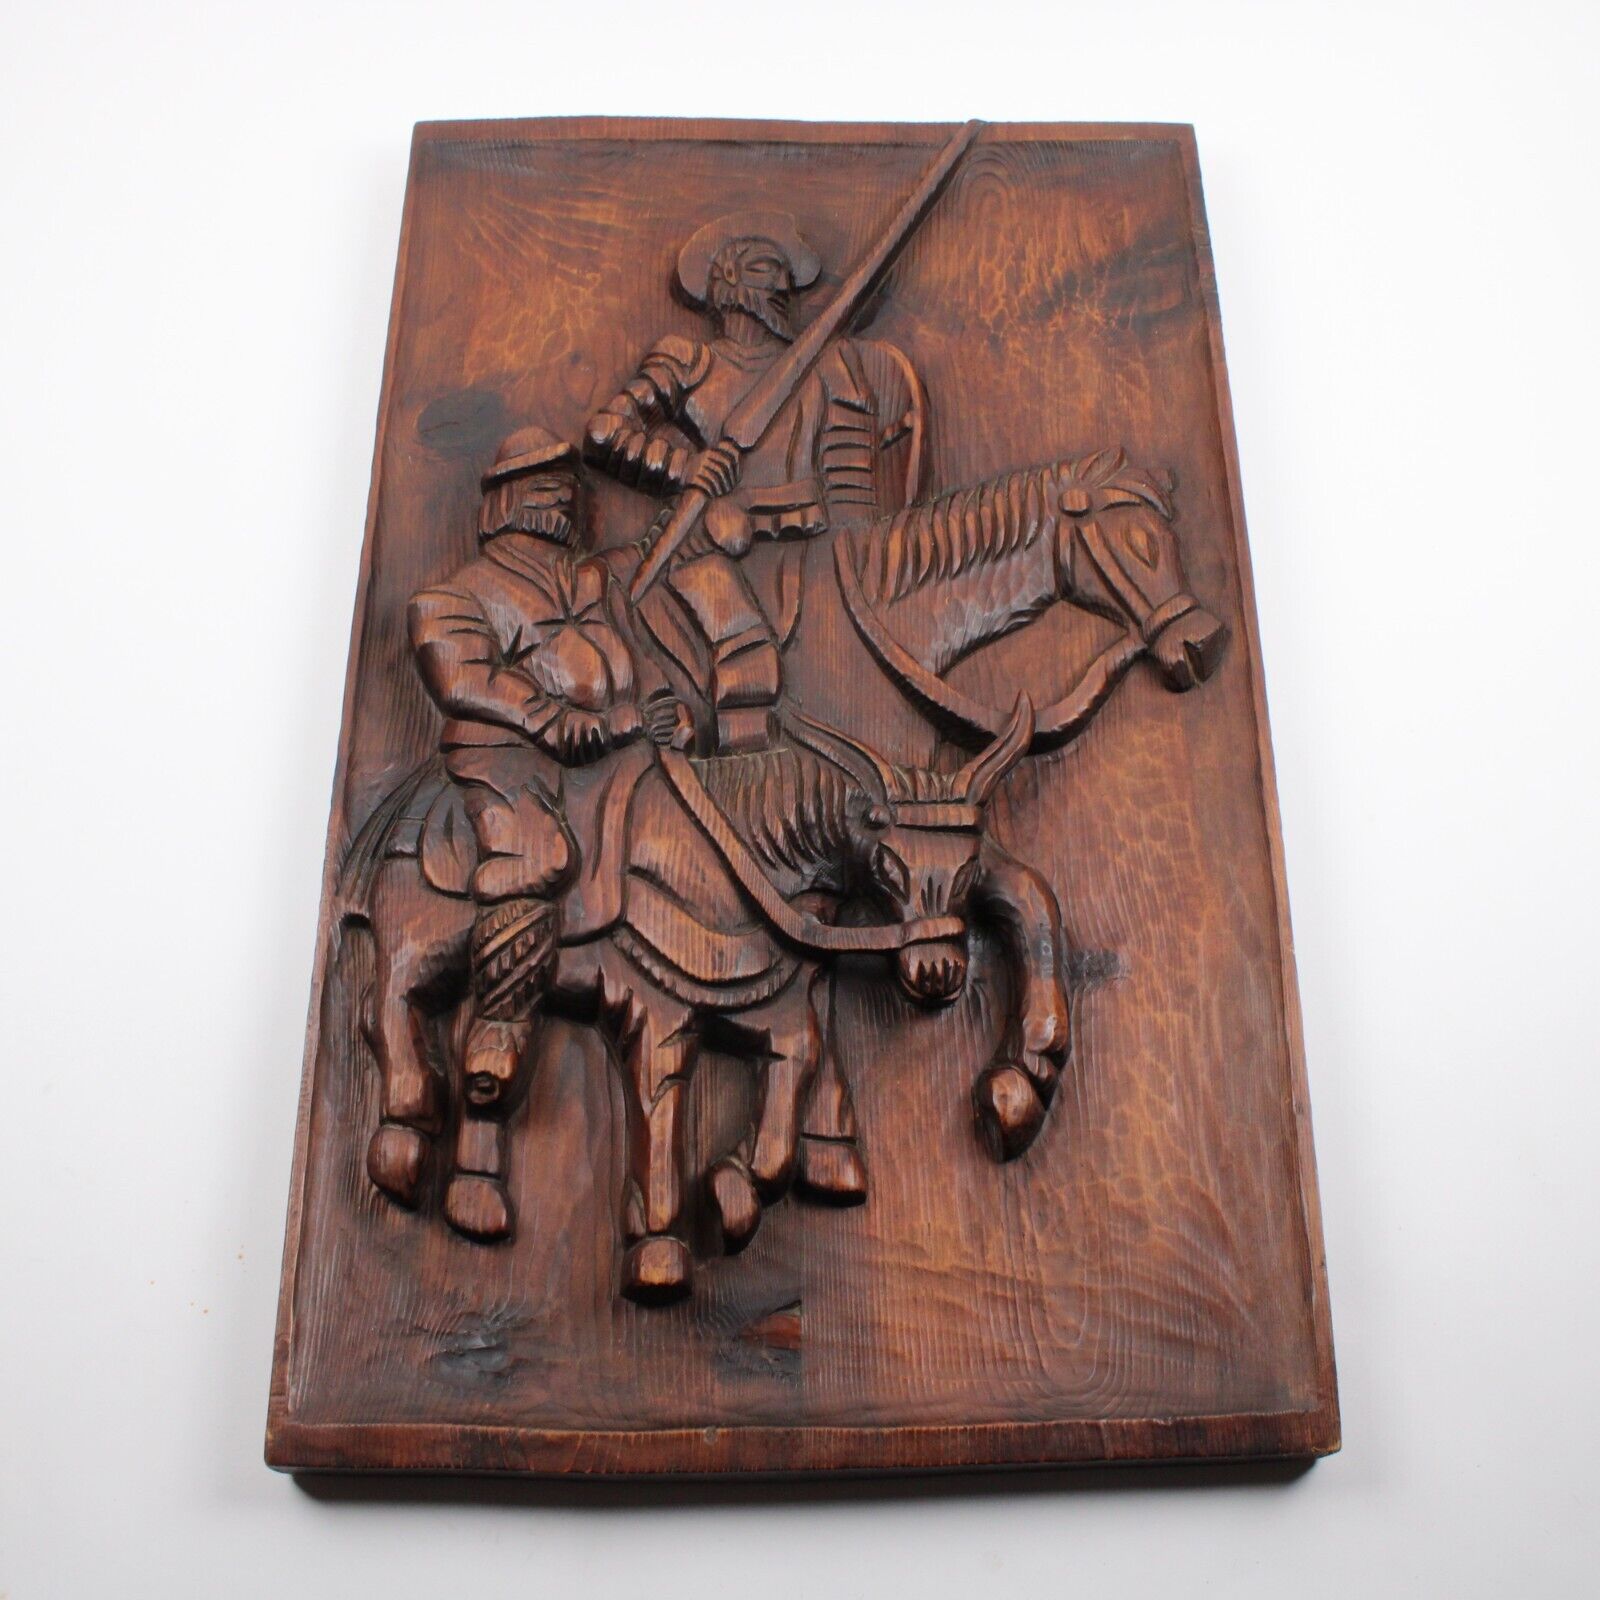 Vintage Old Large Carved Wooden Don Quixote & Sancho Panza Hanging Wall Decor